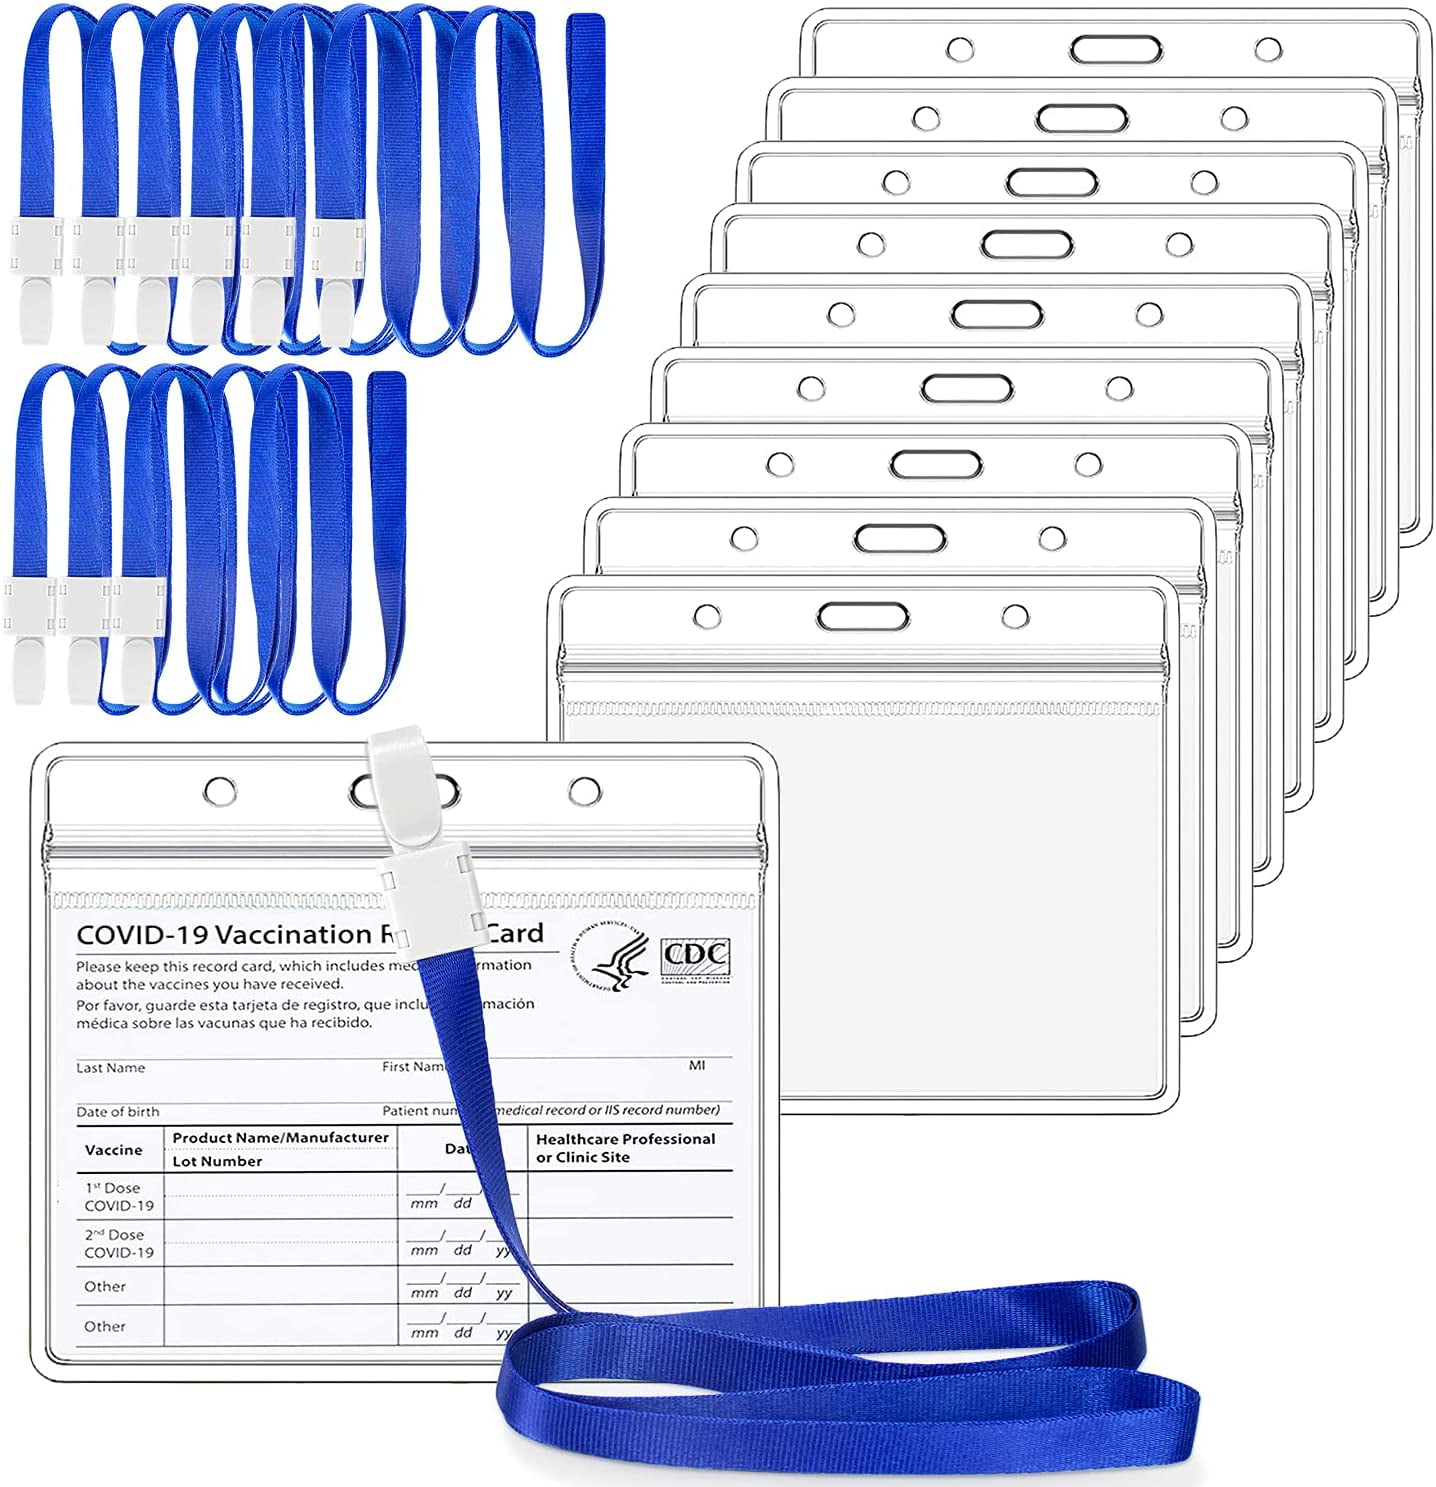 5 Pack CDC Vaccination Card Protector 4.2 X 3 in Vaccine ID Record Card Holders with Lanyard Blue and Orange Available. Black Clear Vinyl Plastic Sleeve with Waterproof Zip 